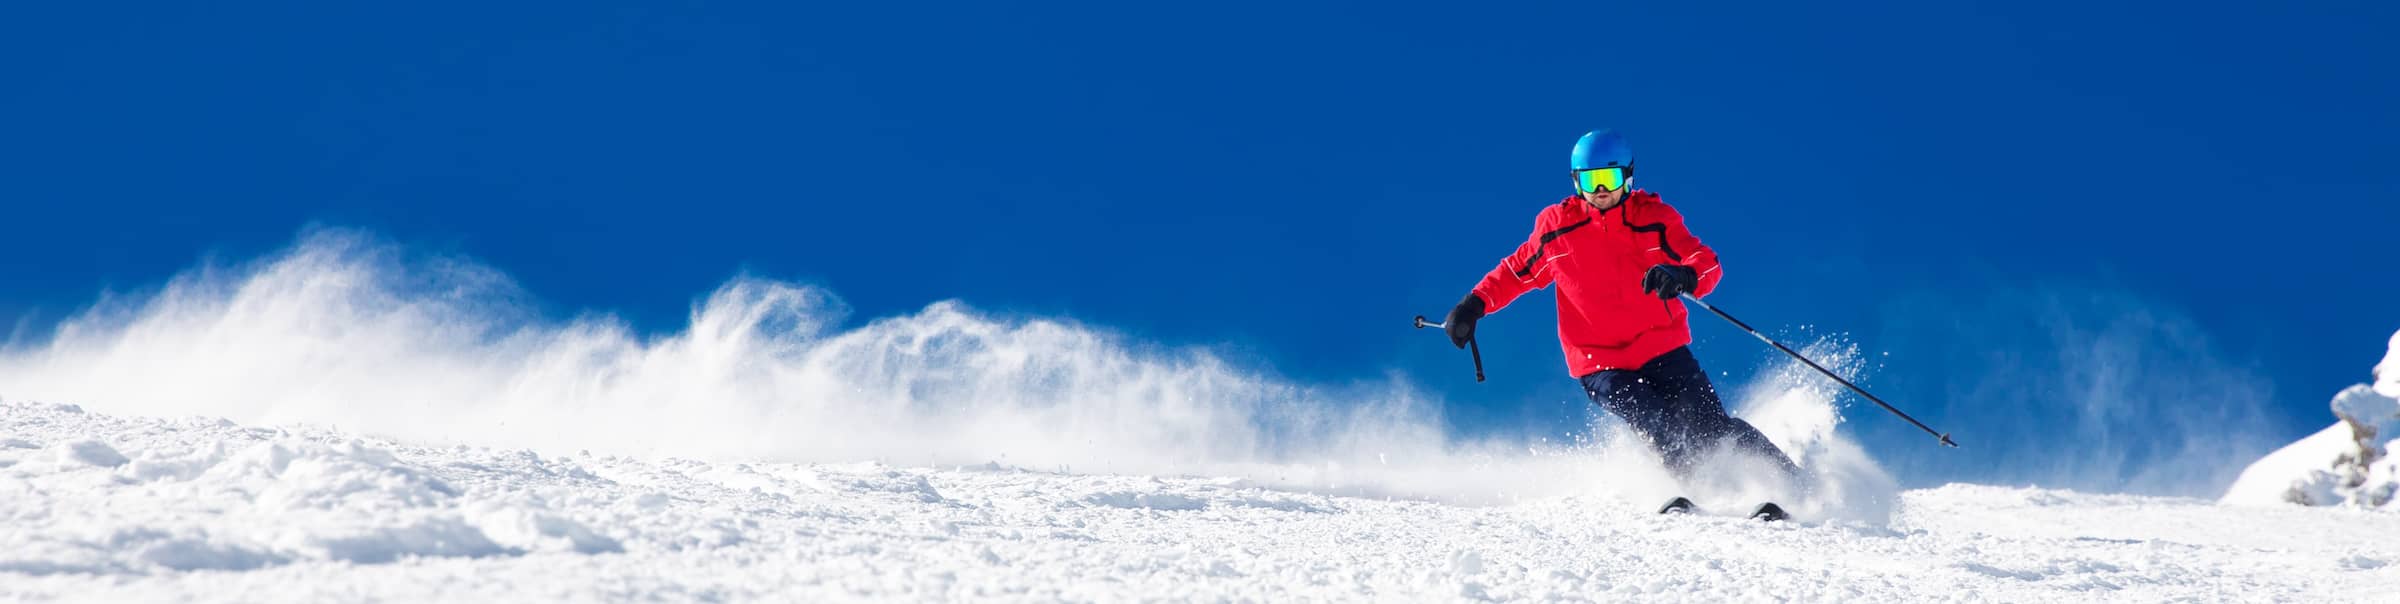 Get snowsports holiday ready: 5 tips on staying safe on the slopes